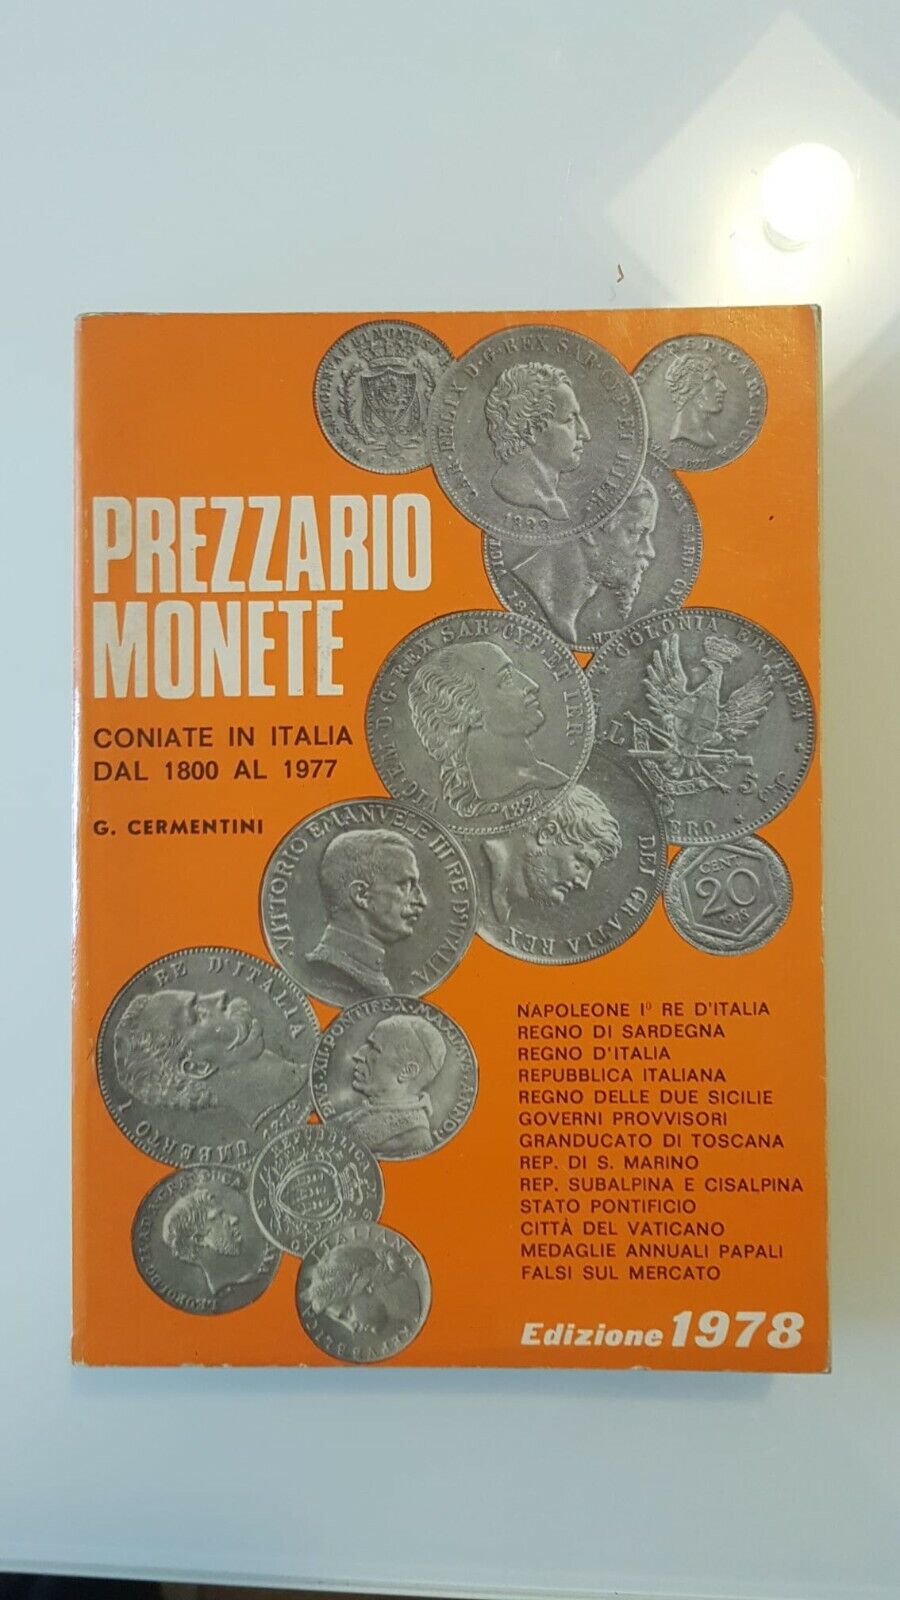 Price list of coins/minted in Italy from 1800 to 1977 - G. Cermentini - ed. 1978